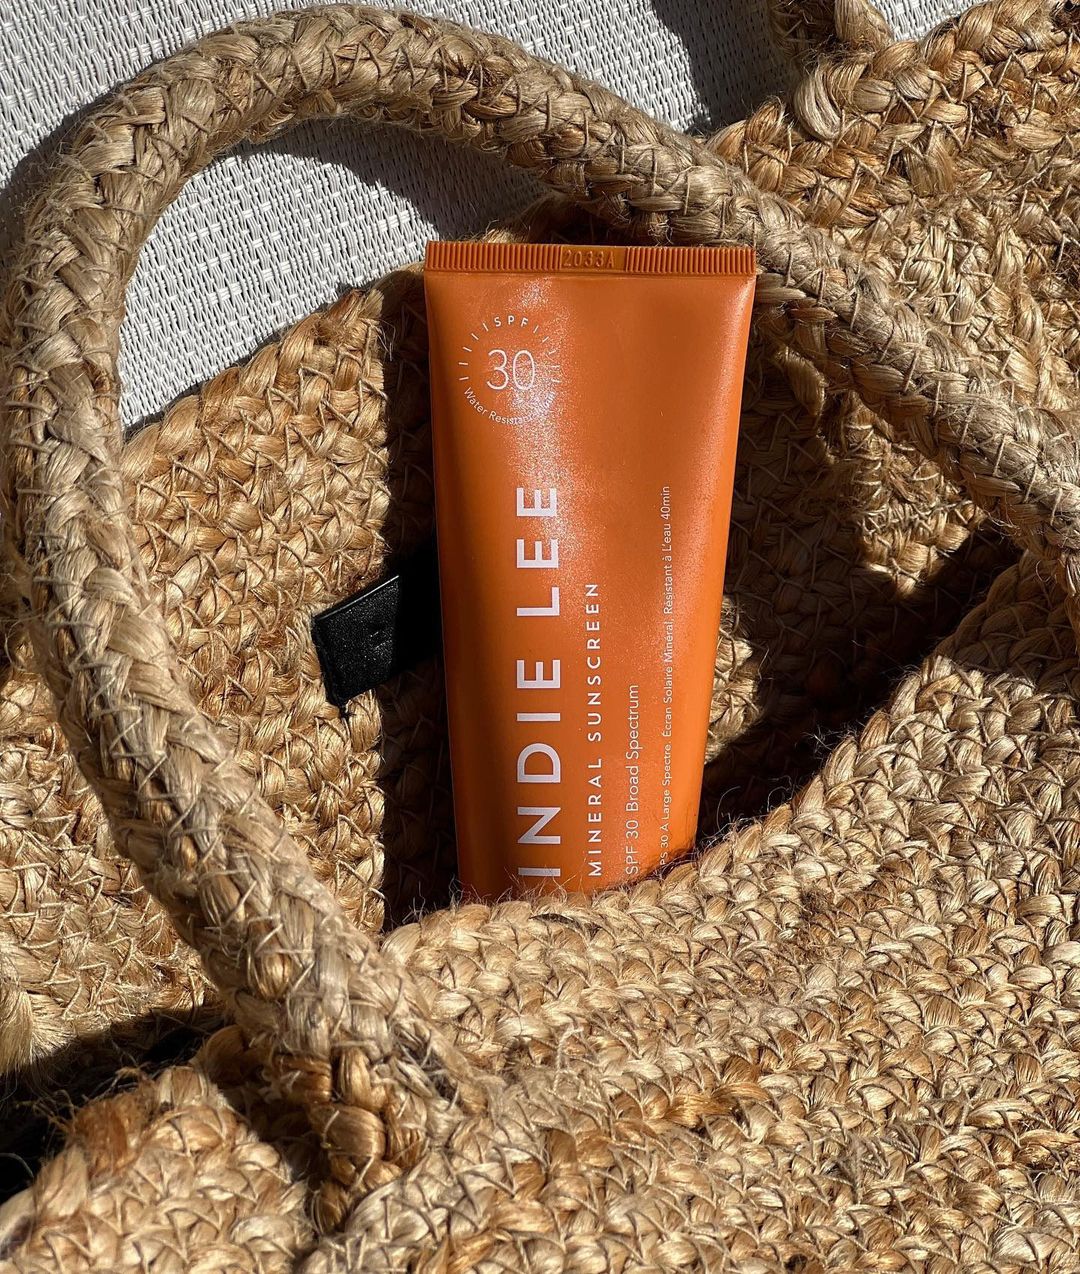 Indie Lee sunscreen in purse